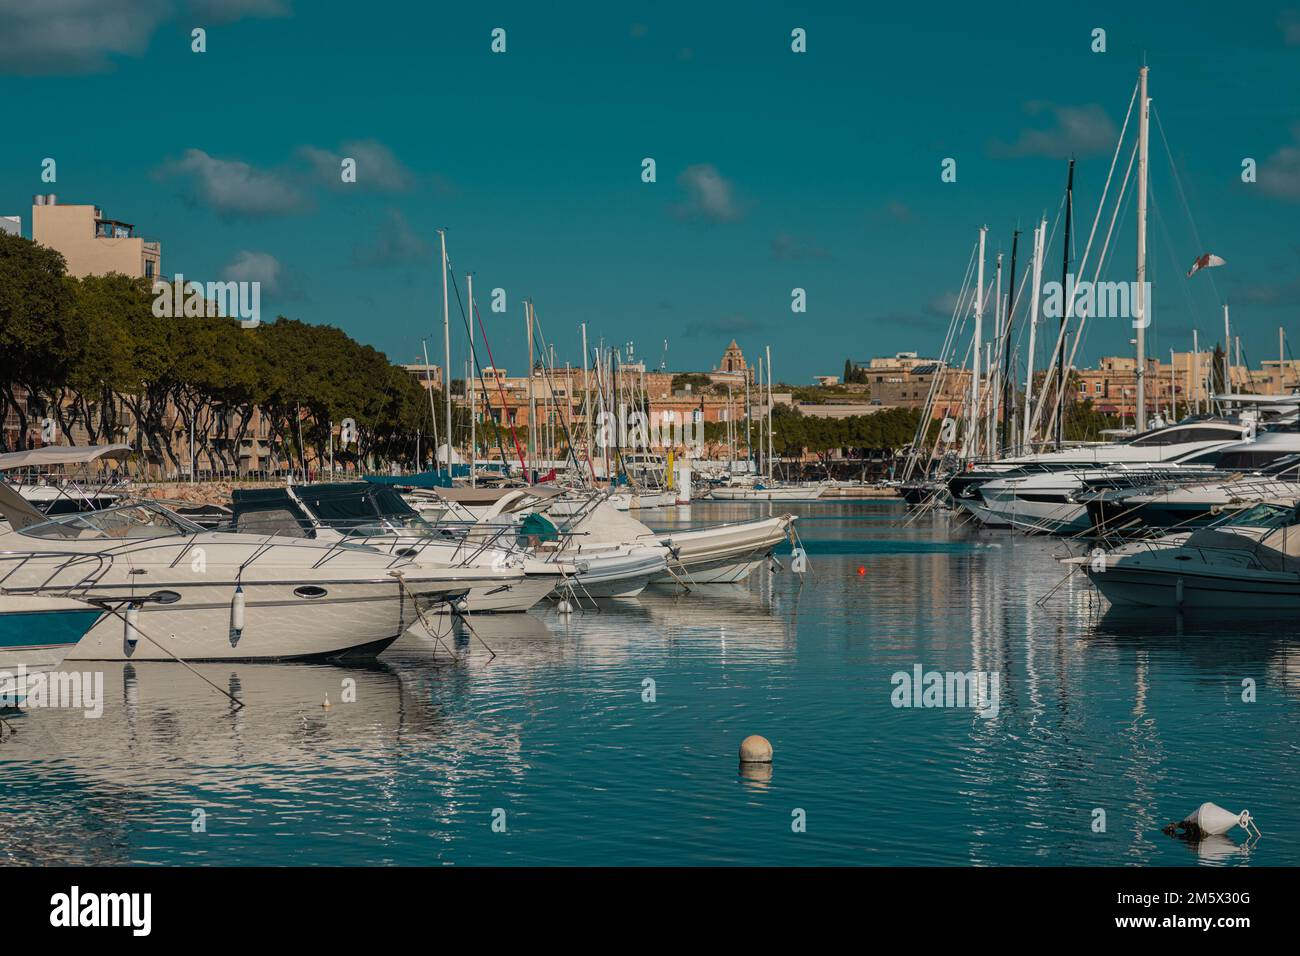 Marina in Valletta, Malta on a summer day. Visible multitude of boats and yachts with some buildings in the background. Stock Photo